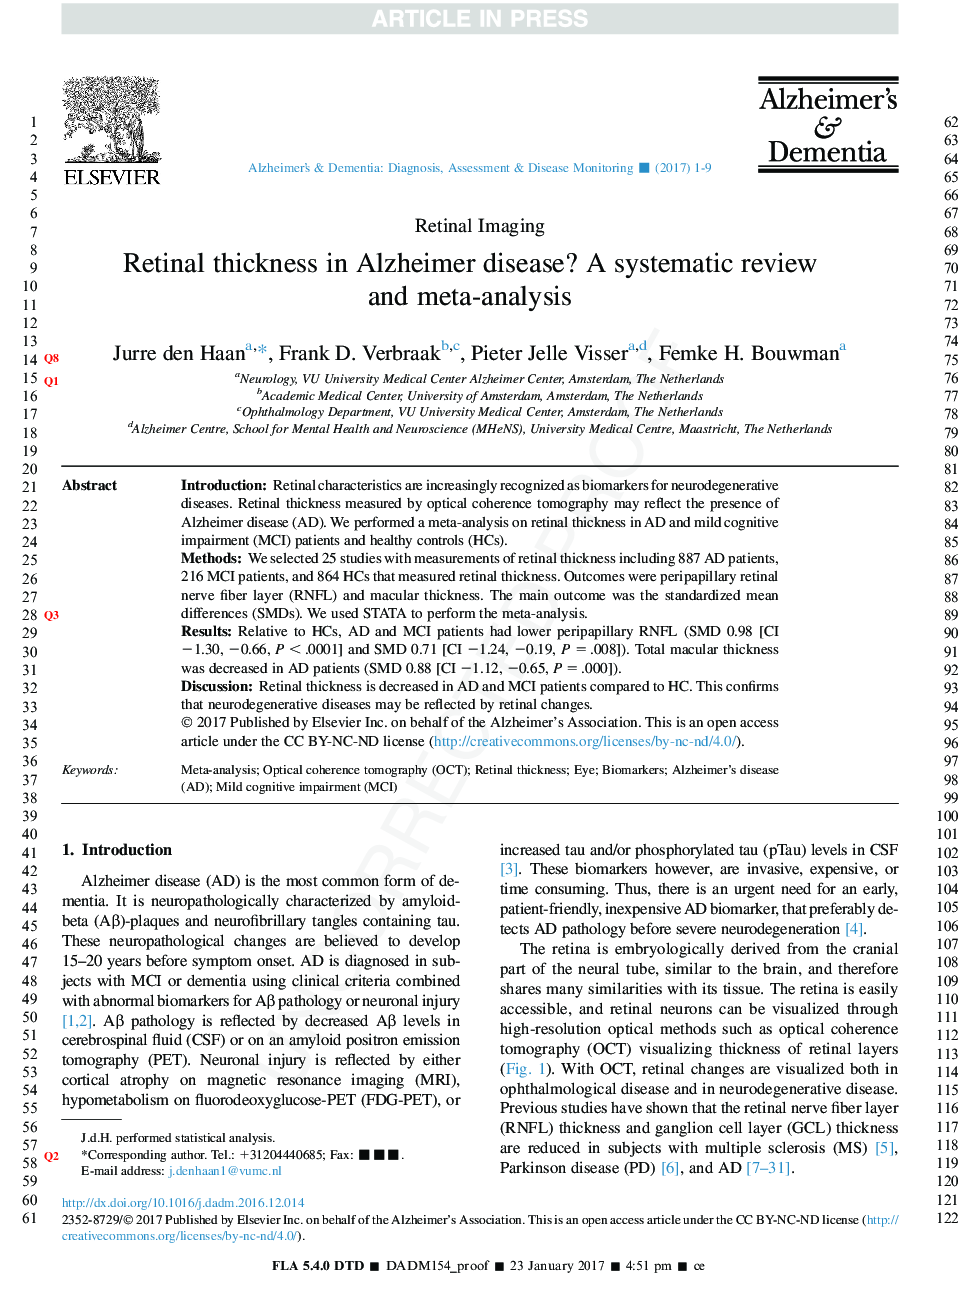 Retinal thickness in Alzheimer's disease: A systematic review andÂ meta-analysis